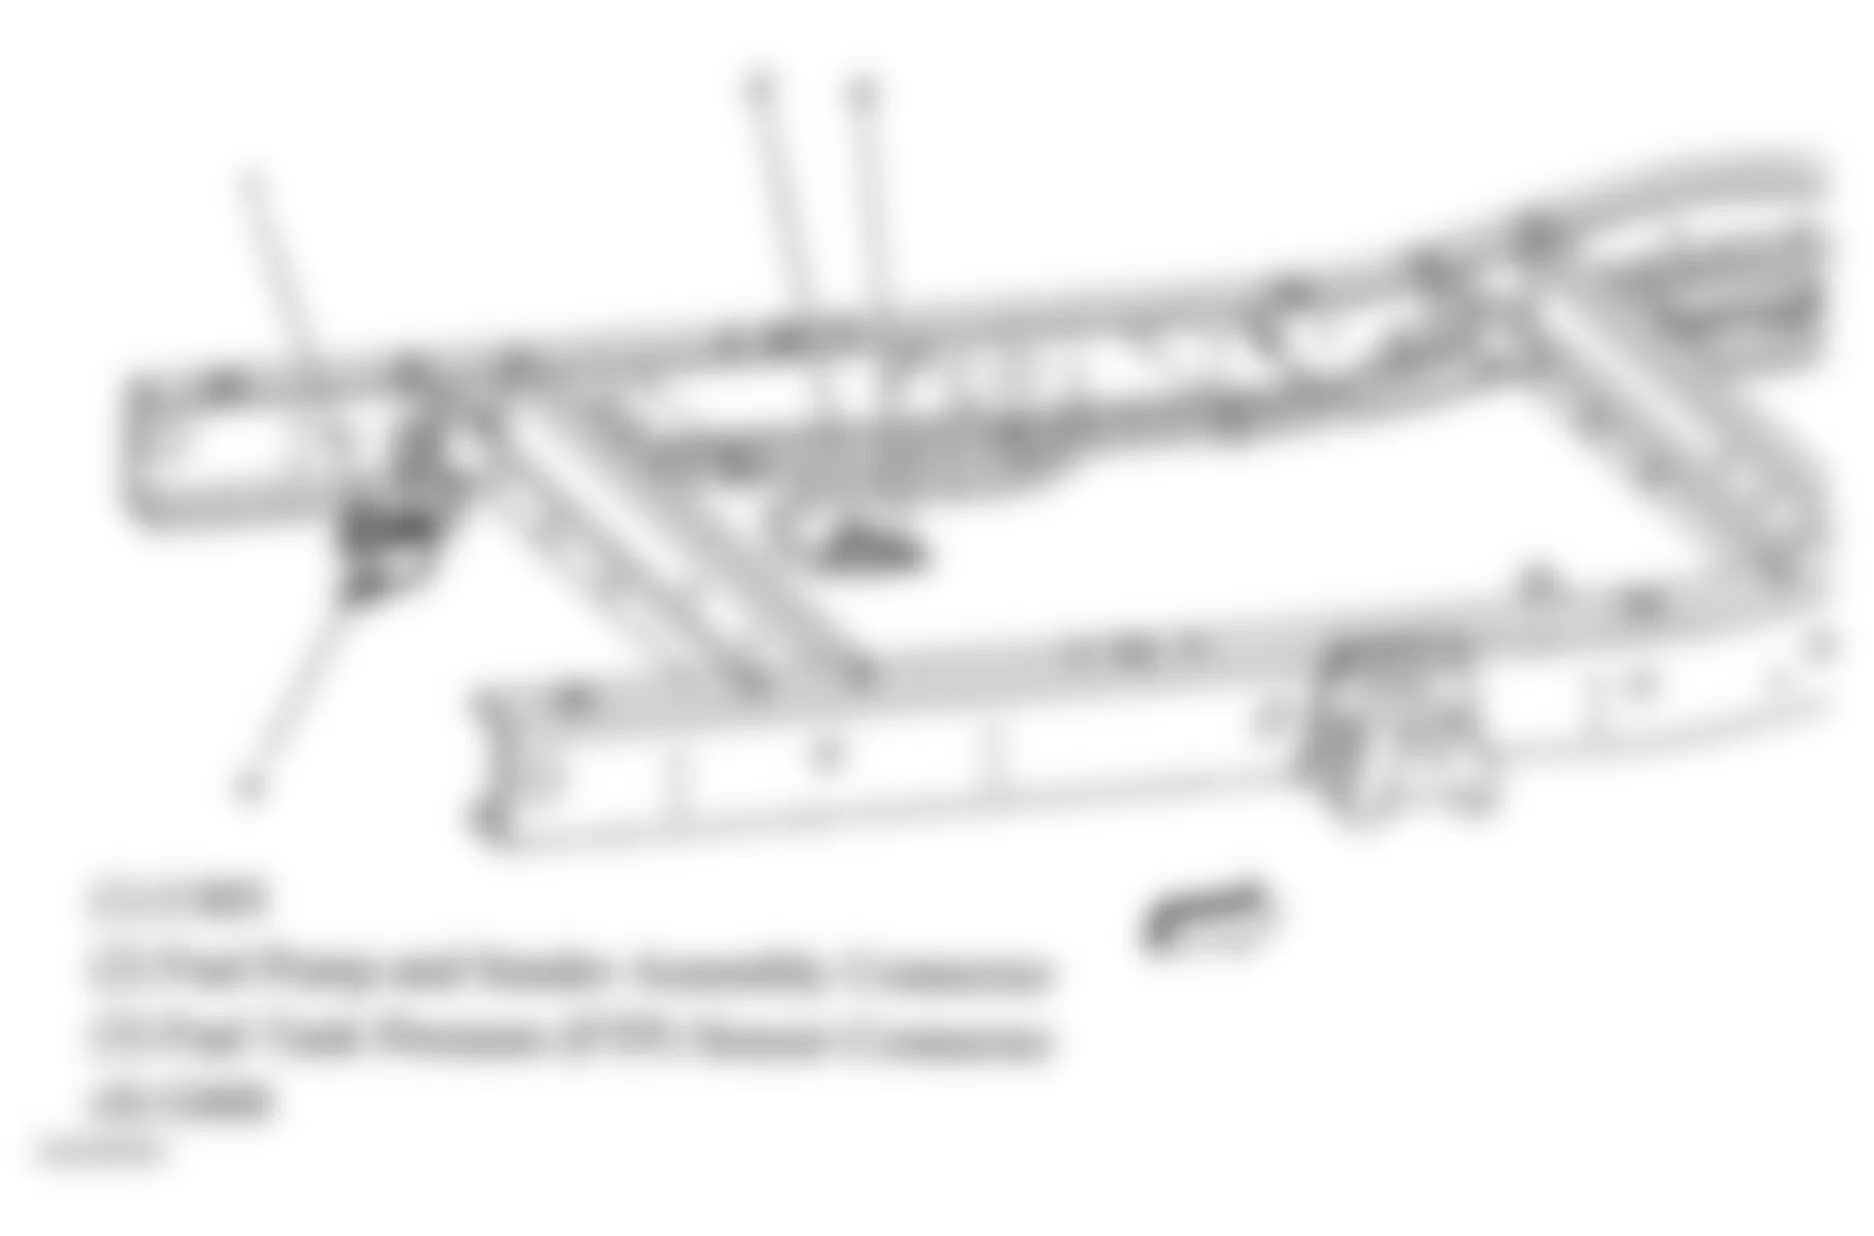 GMC Savana Special G3500 2004 - Component Locations -  Rear Chassis (Cutaway)